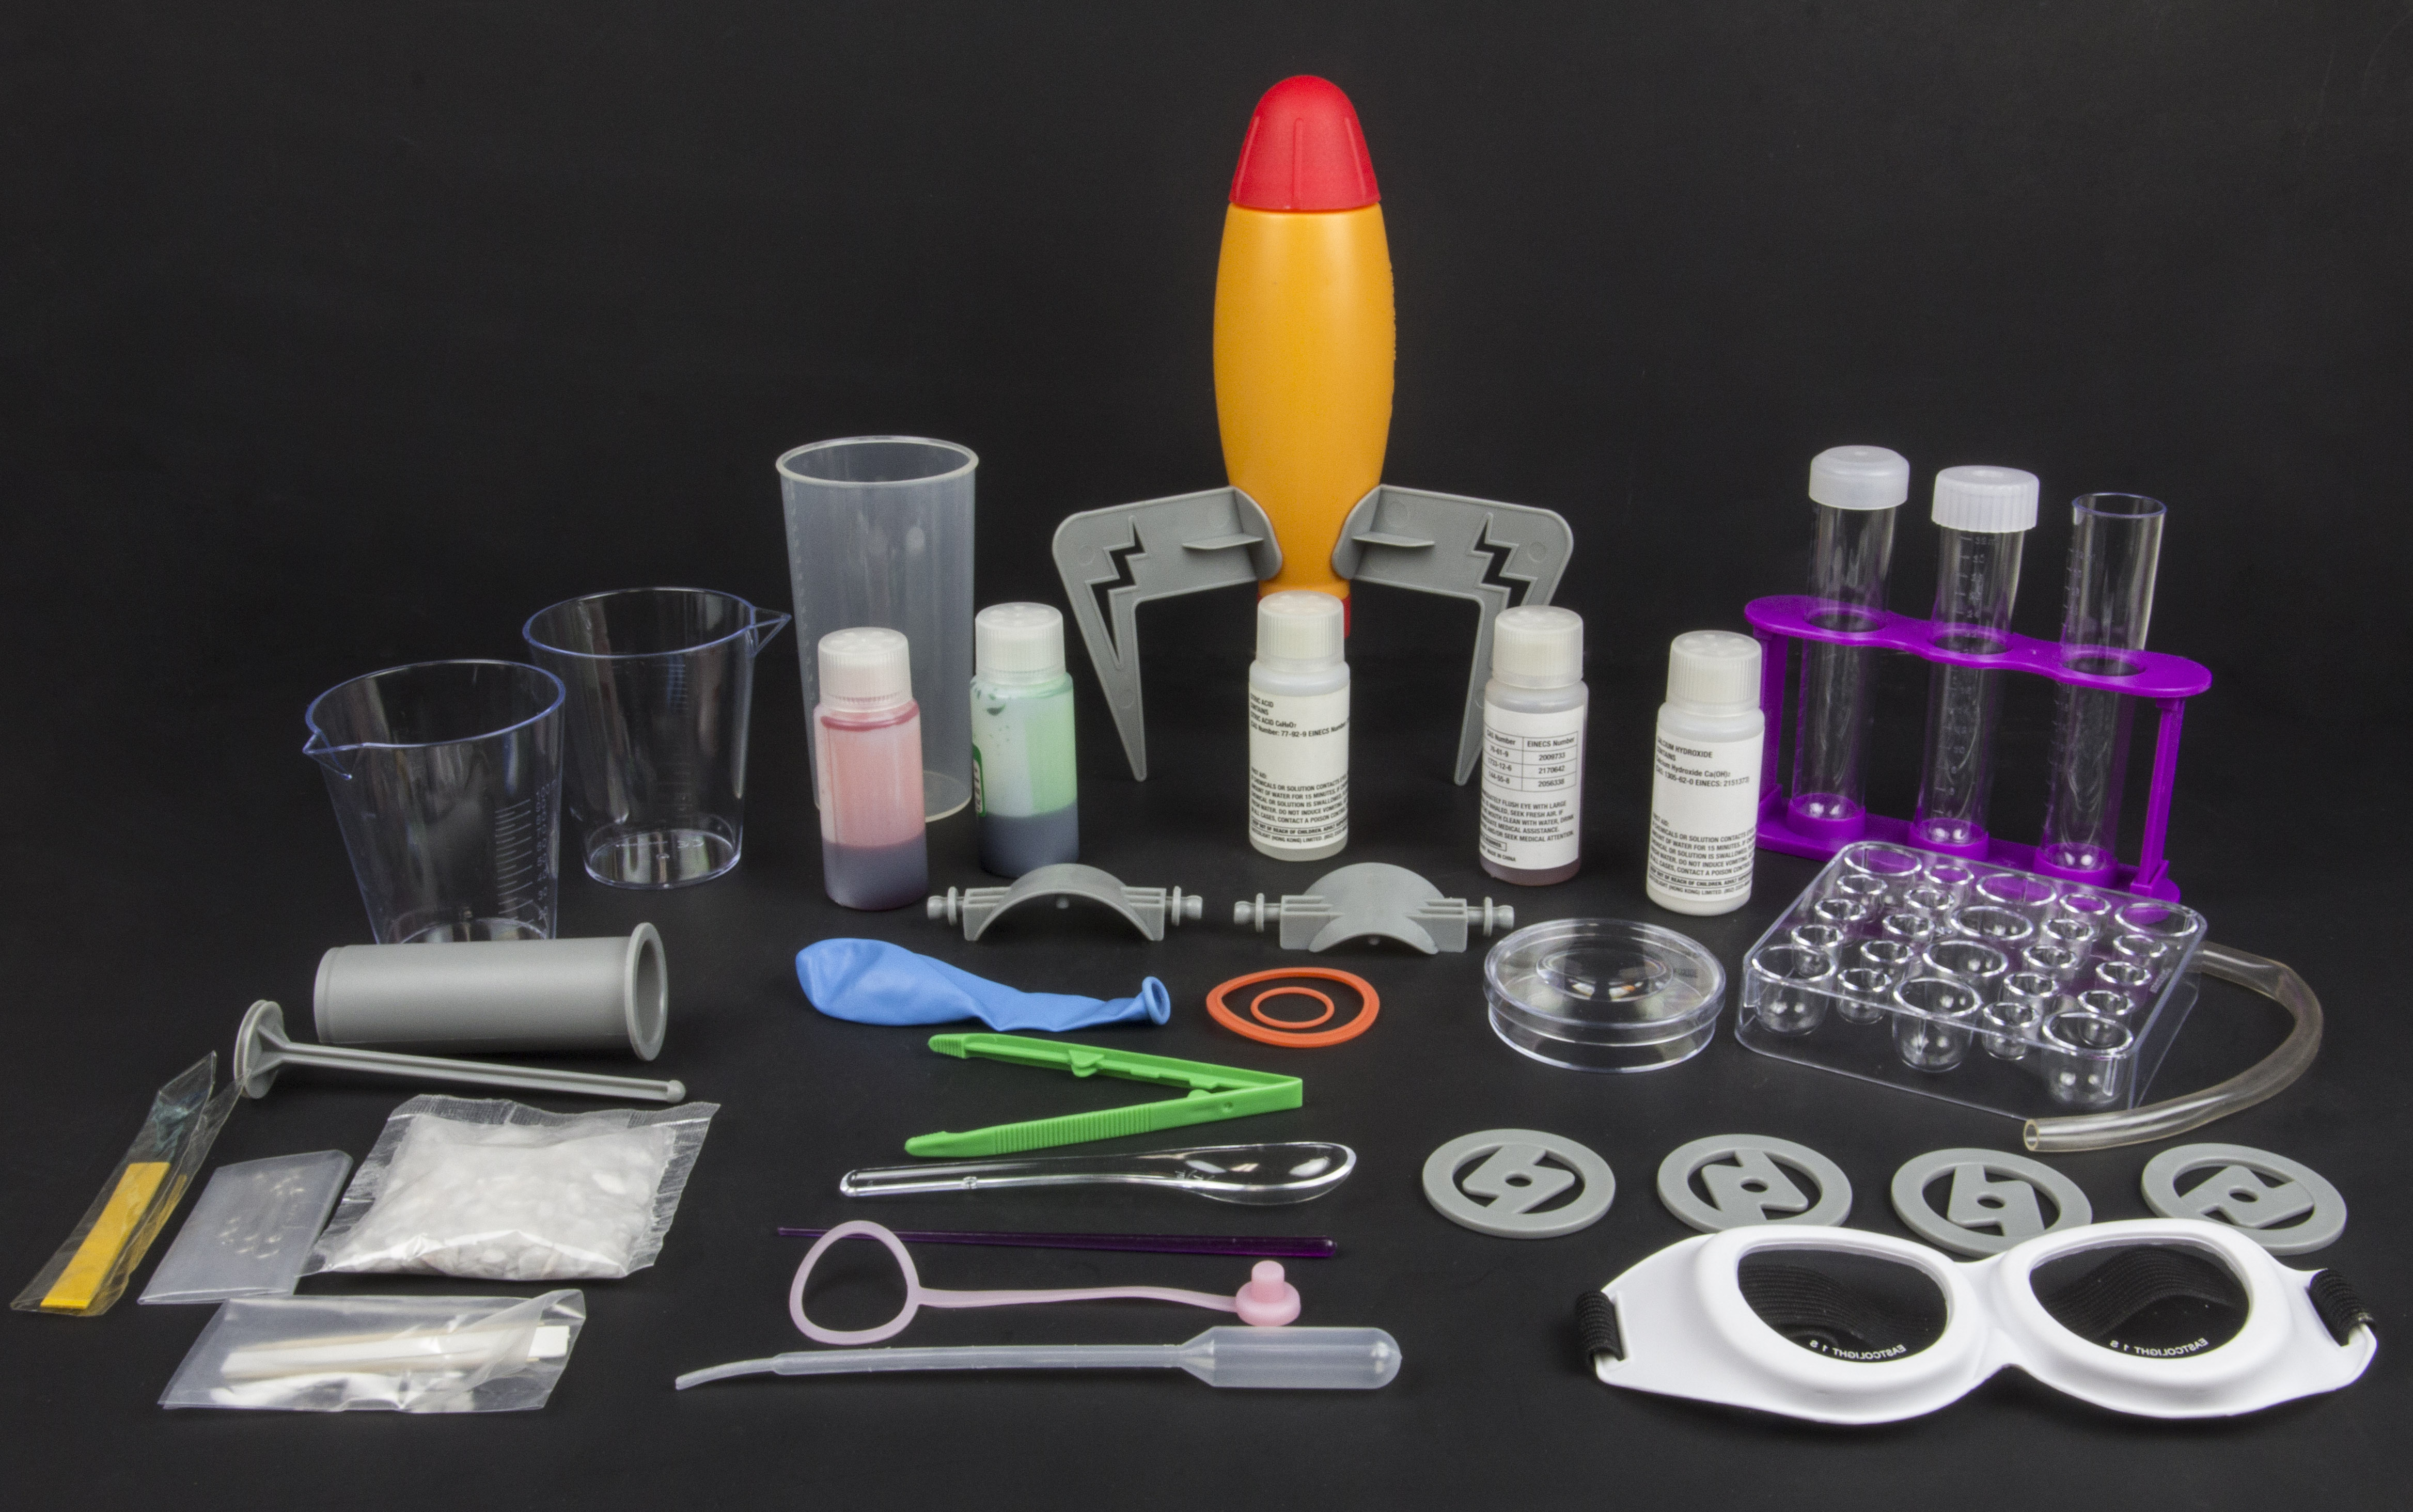 Chemistry Kits - Experiments for Kids, Activities & More ...